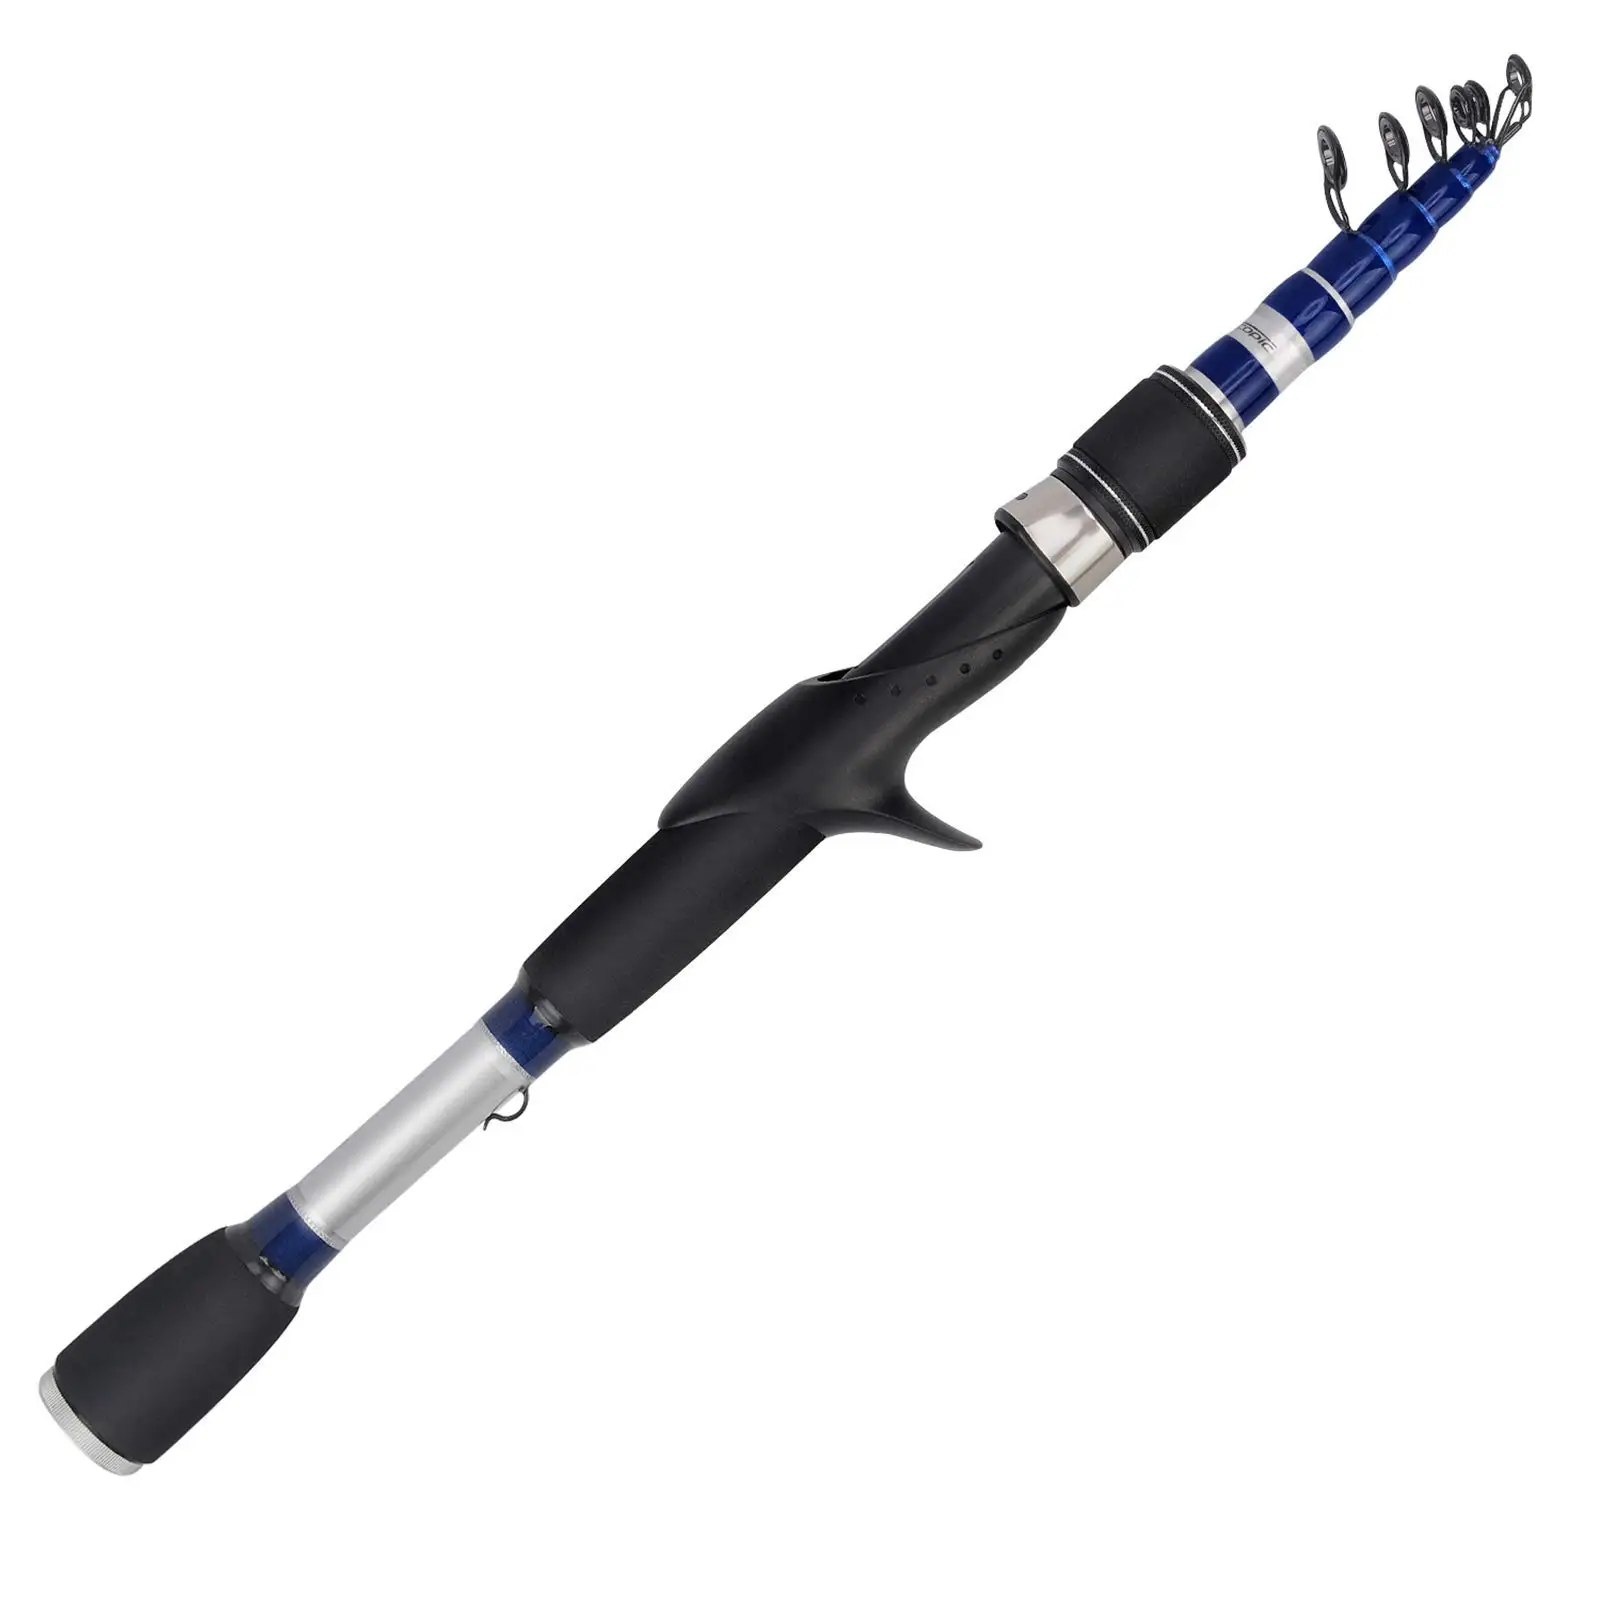 

Telescoping Fishing Rod Combo, Sensitive Graphite Composite Blank, Easy to Carry, Package Length Only 17"